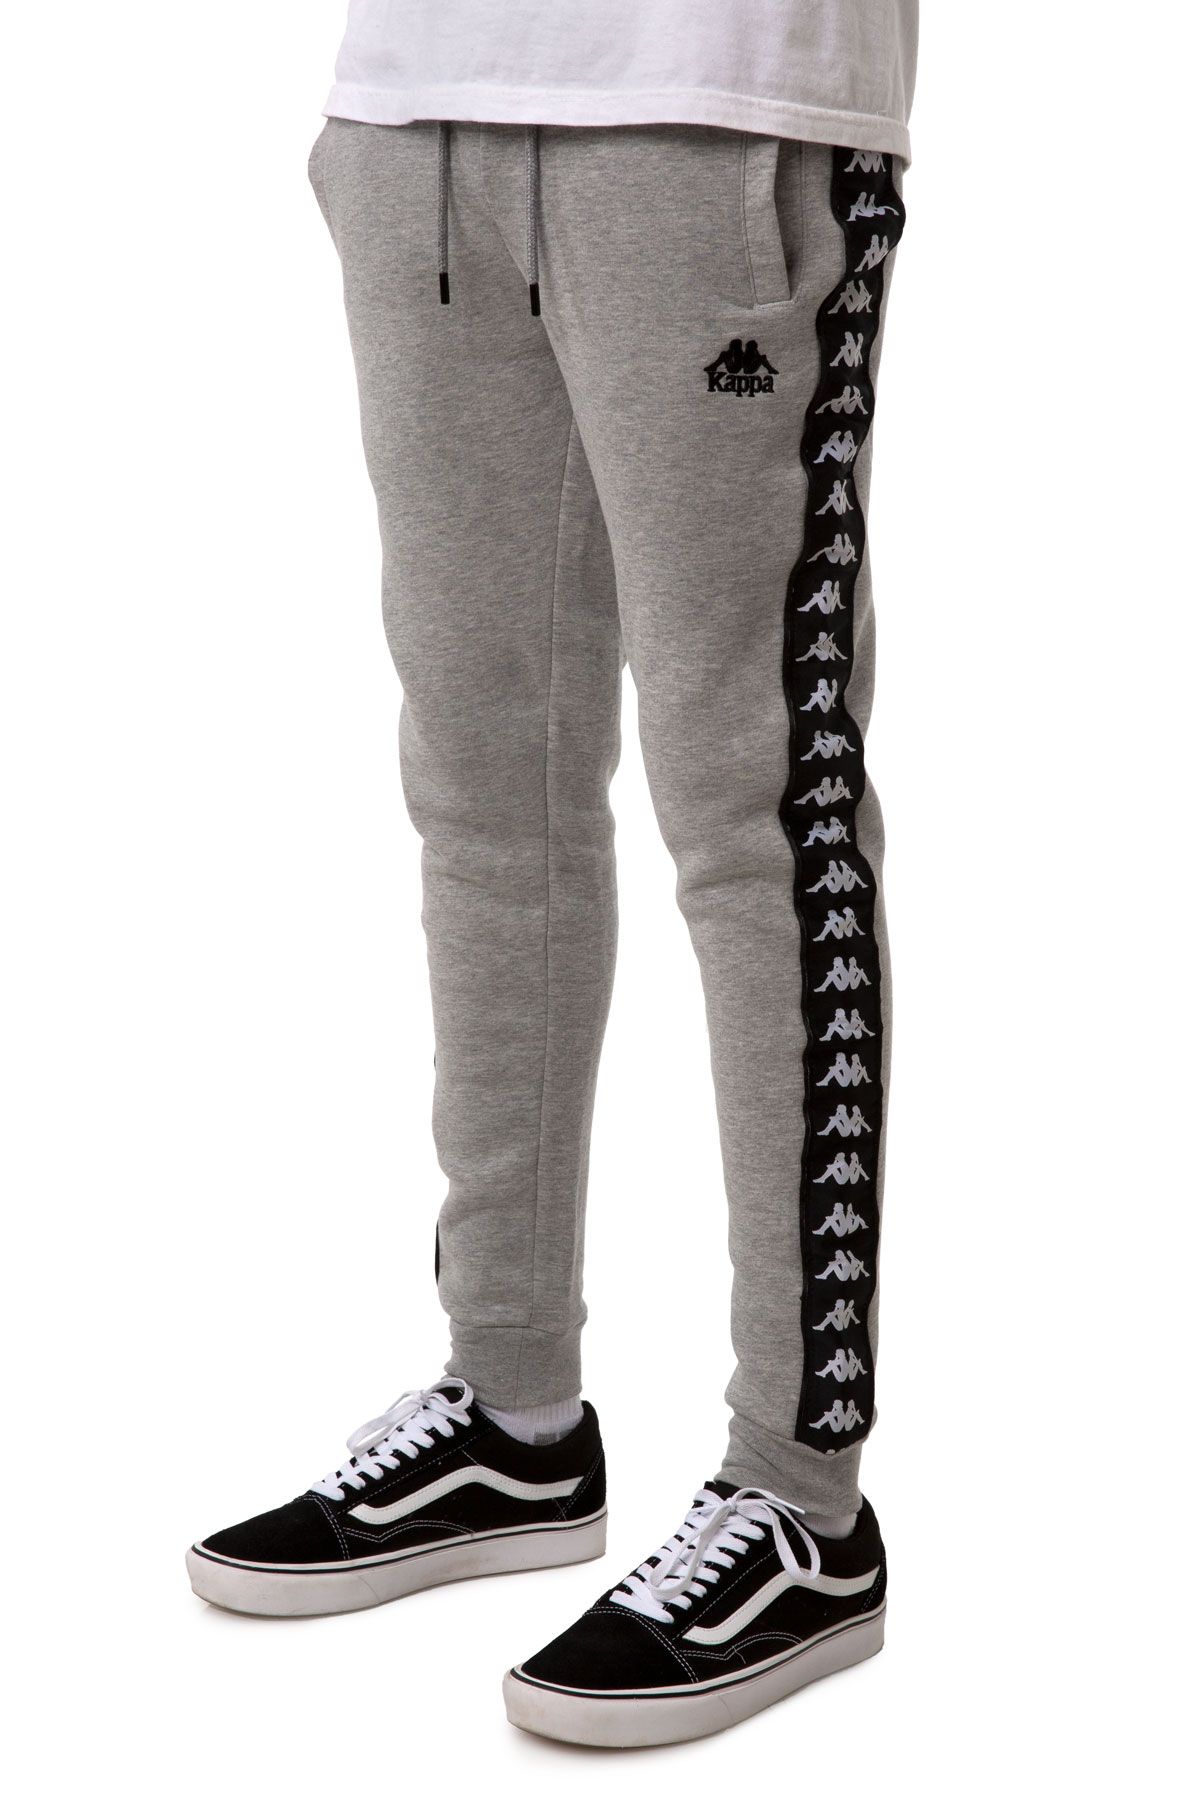 Kappa sweatpants With Side Taping In Gray